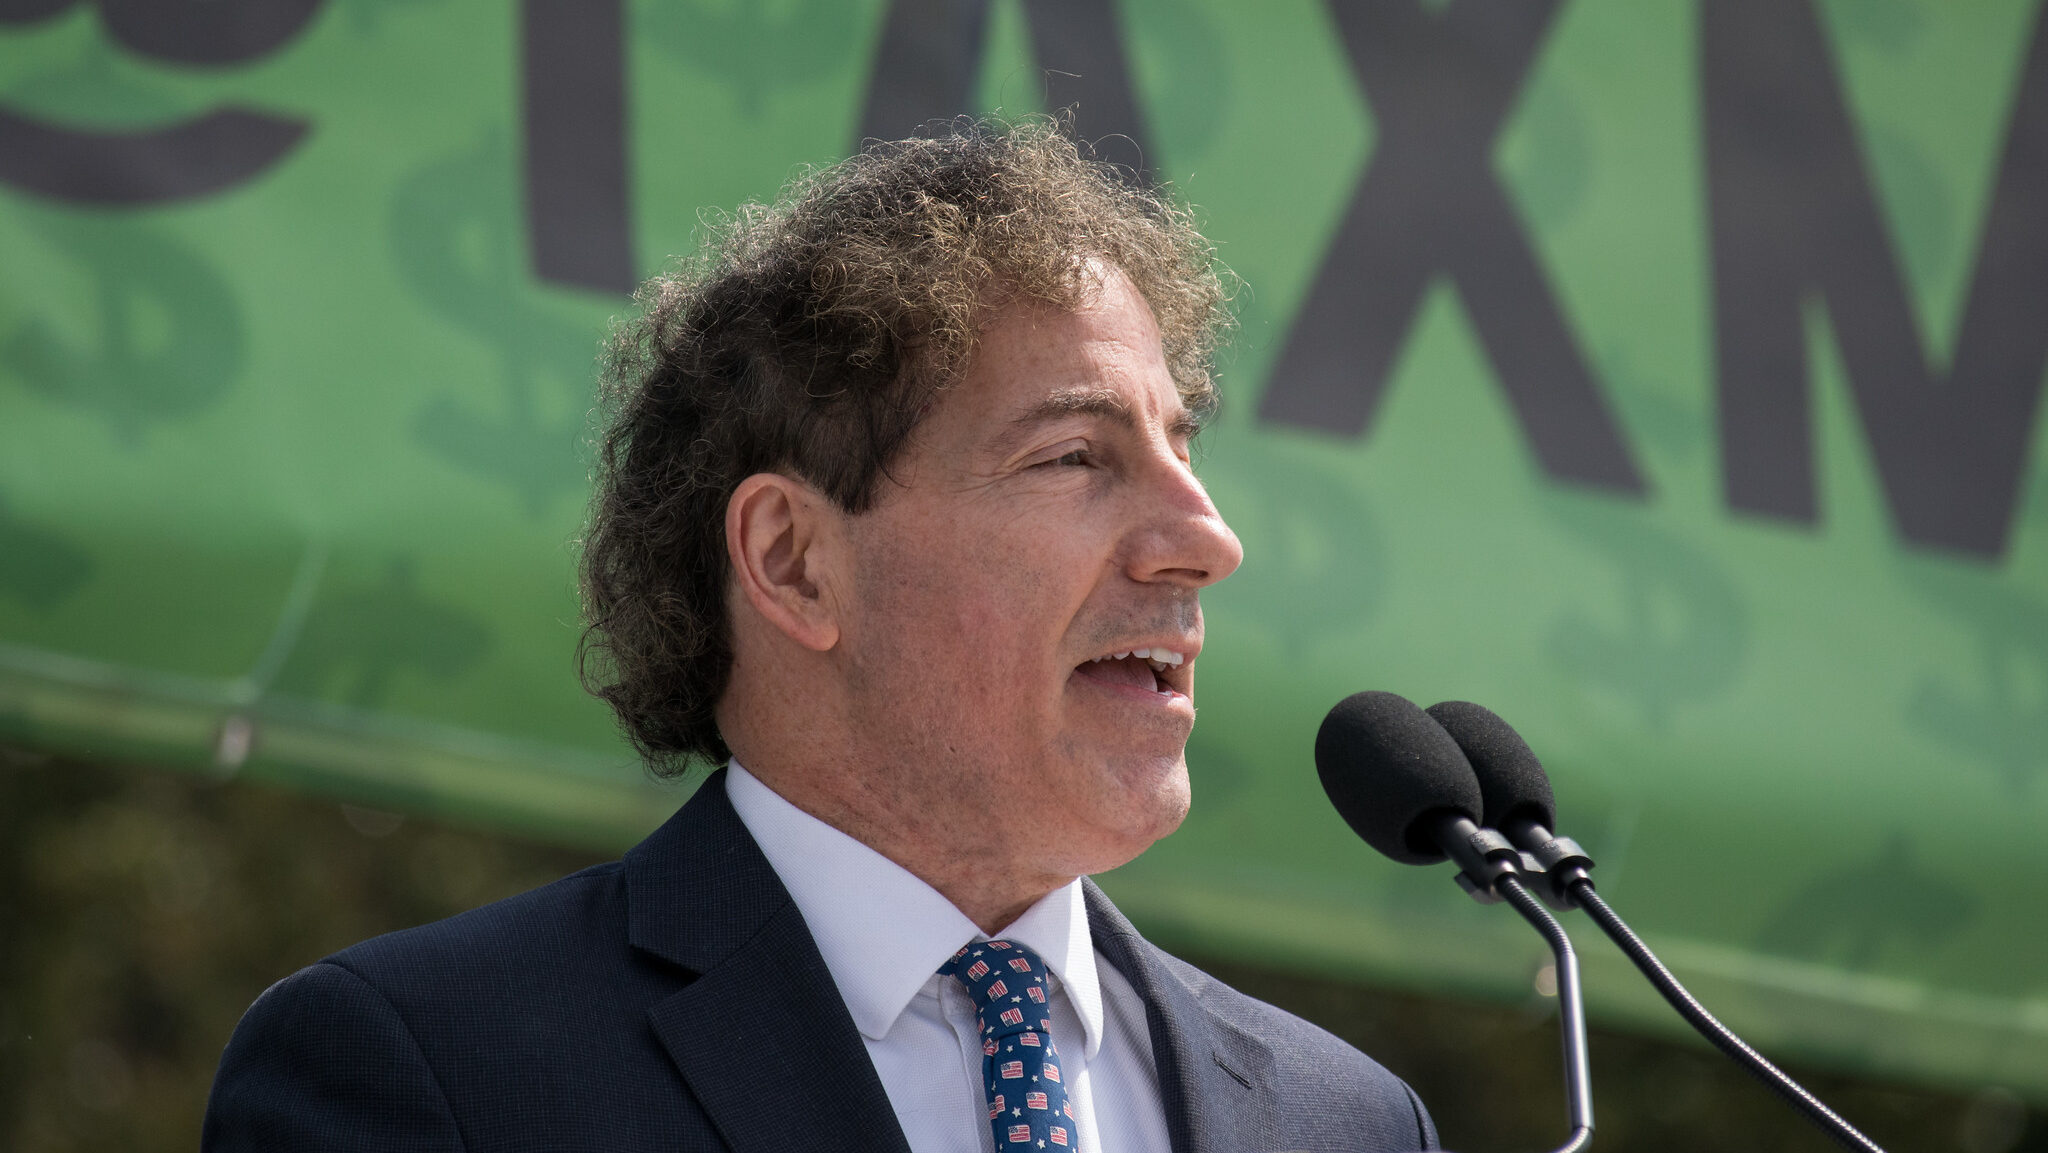 Democrats support giving non-citizens the right to vote in U.S. elections, as confirmed by Jamie Raskin